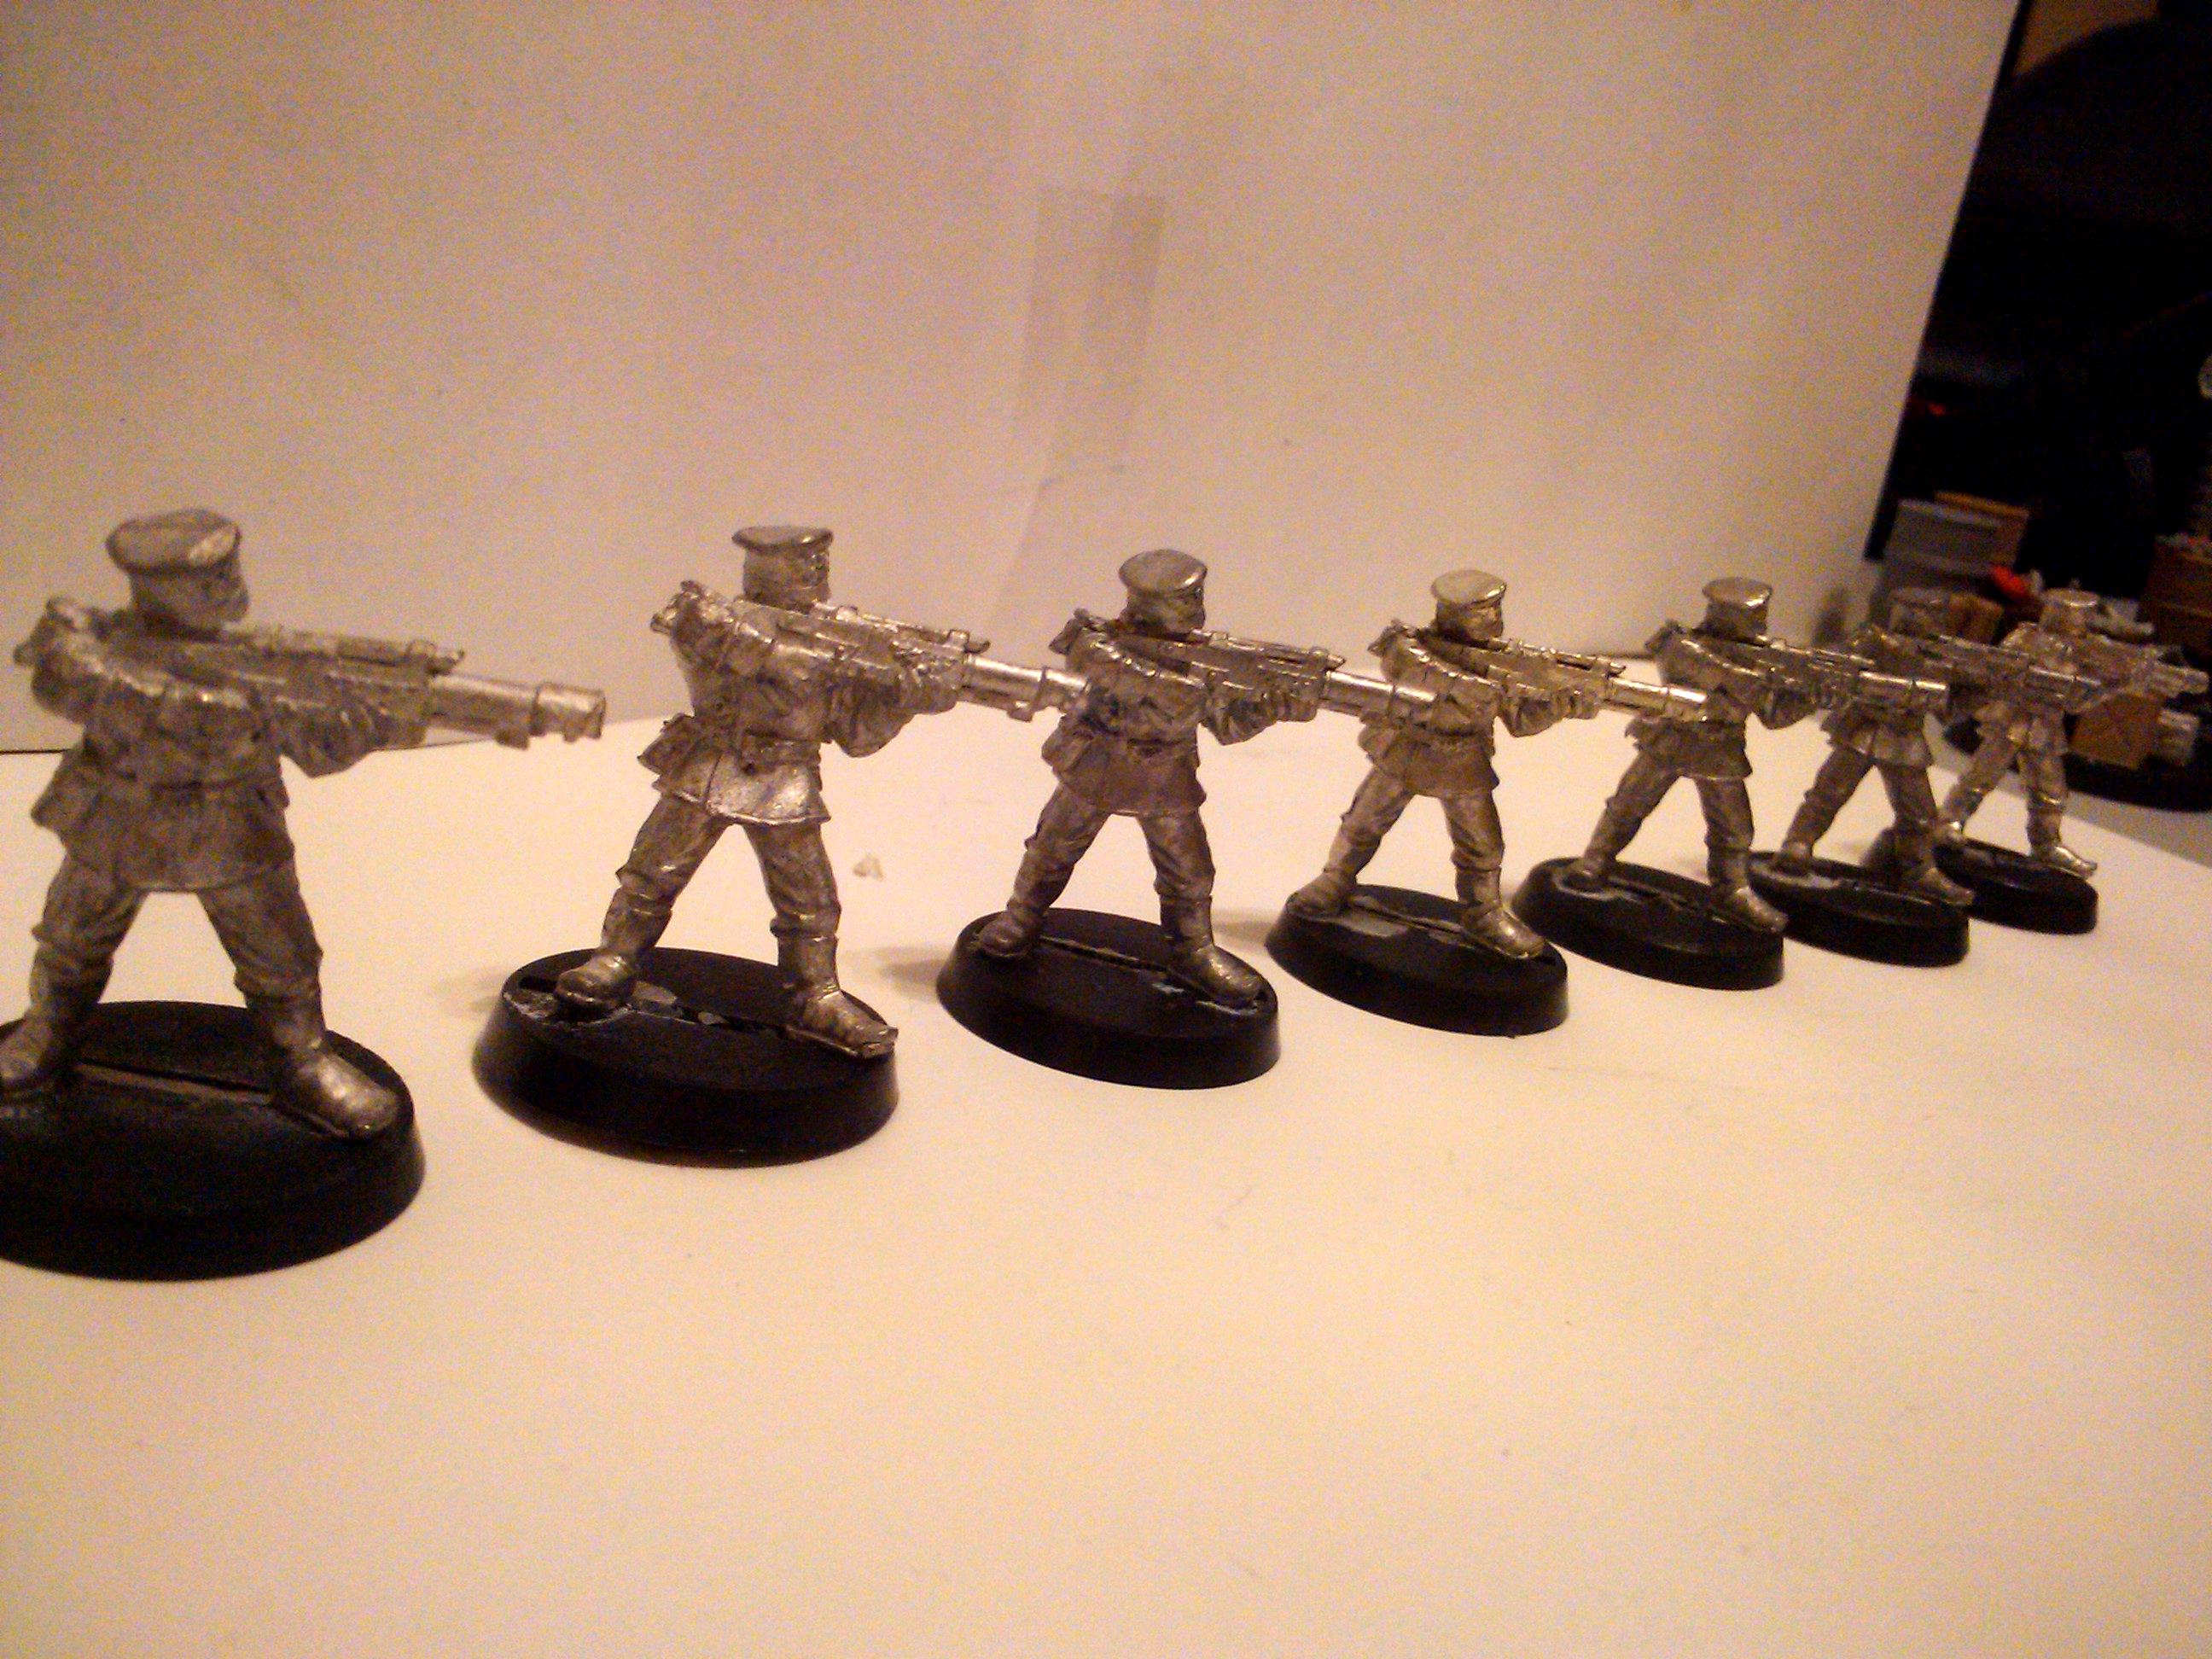 2nd Edition, Games Workshop, Imperial Guard, Mordian, Mordian Iron Guard, Warhammer 40,000